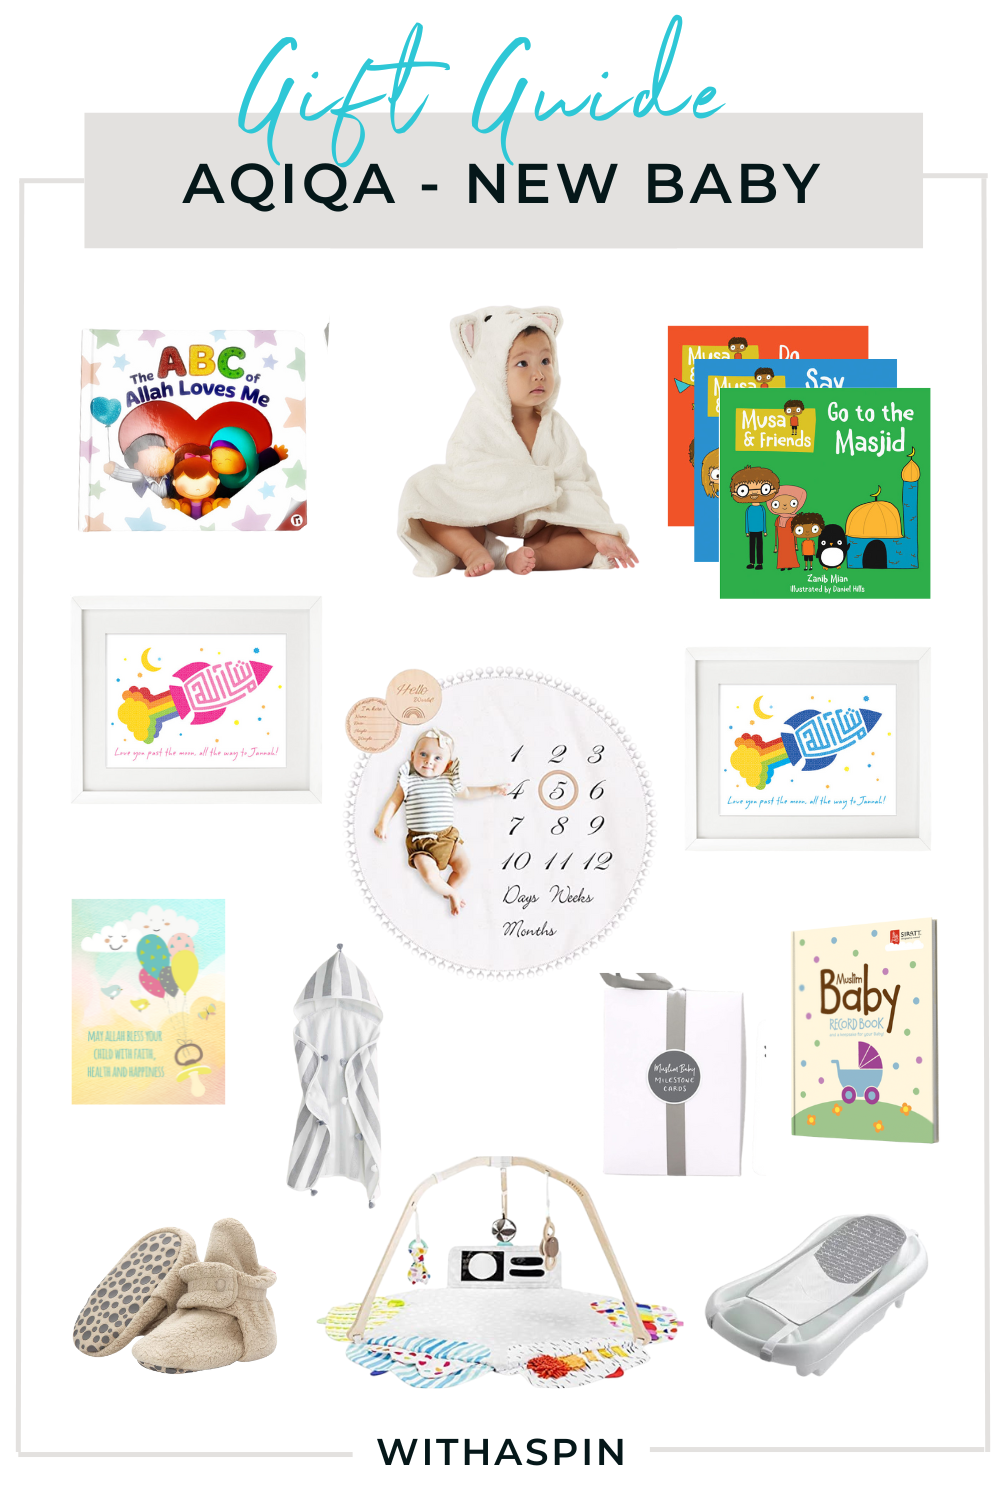 Adorable Baby's Gift Sets - The Palm Beach Baby